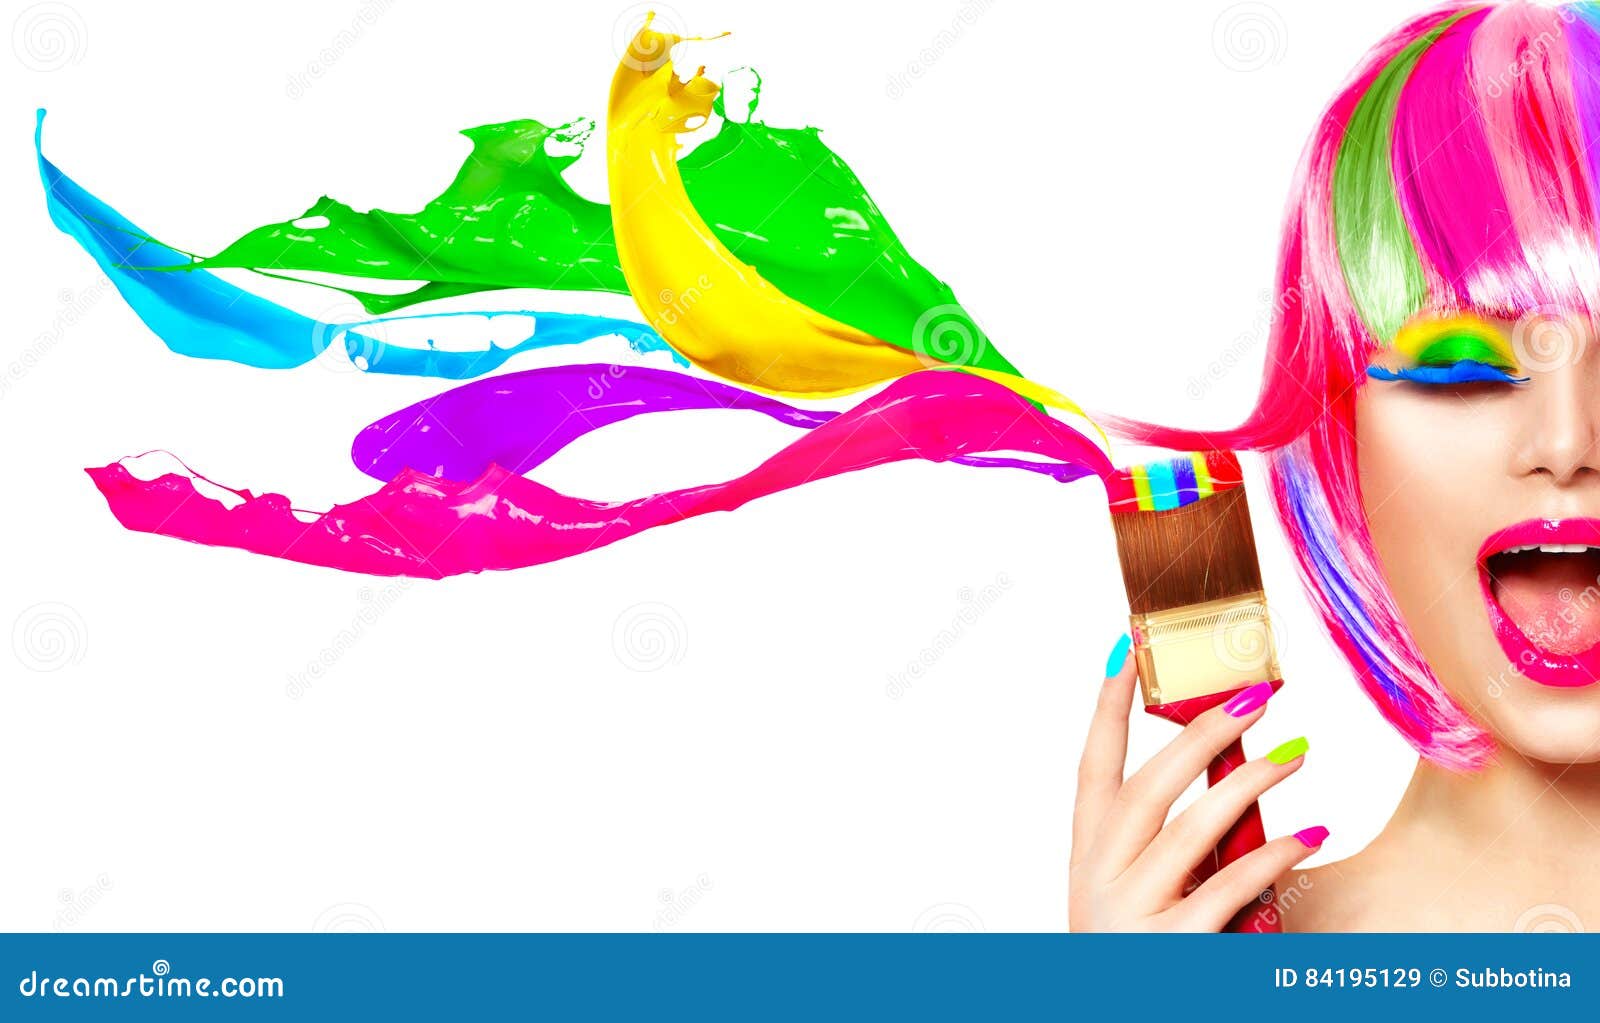 dyed hair humor concept. beauty model woman painting her hair